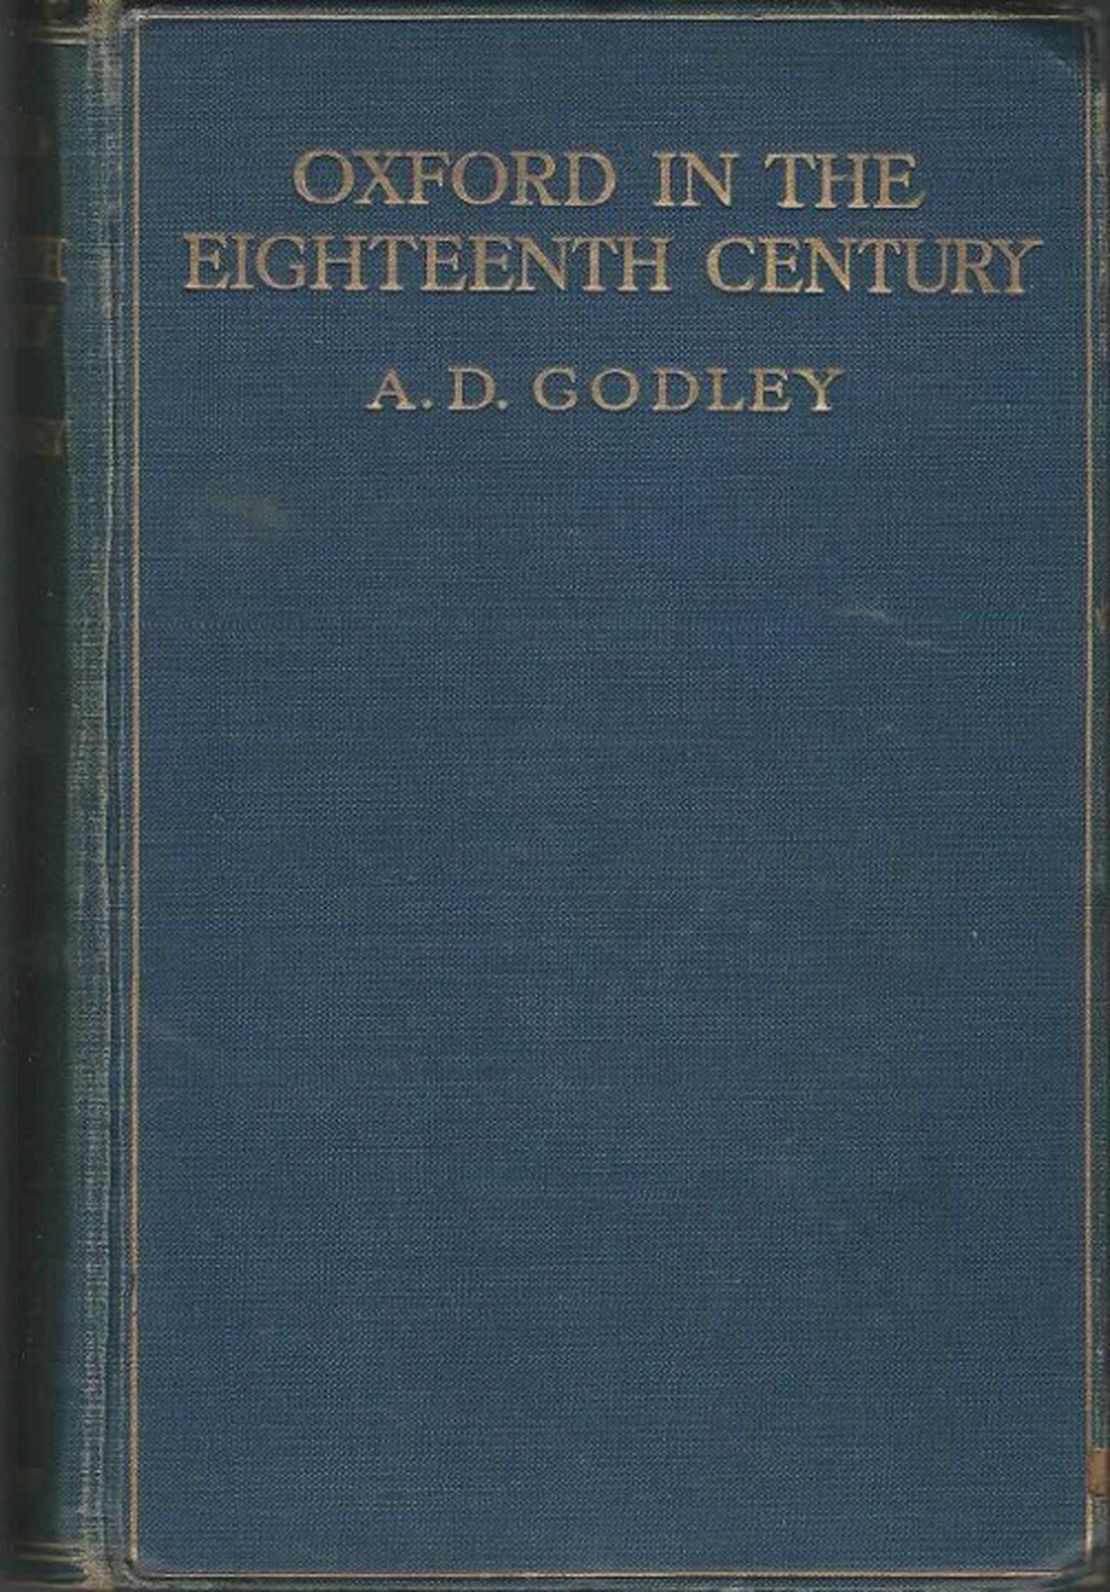 Alfred Denis Godley, classical scholar and writer, is born in Ashfield, Co. Cavan